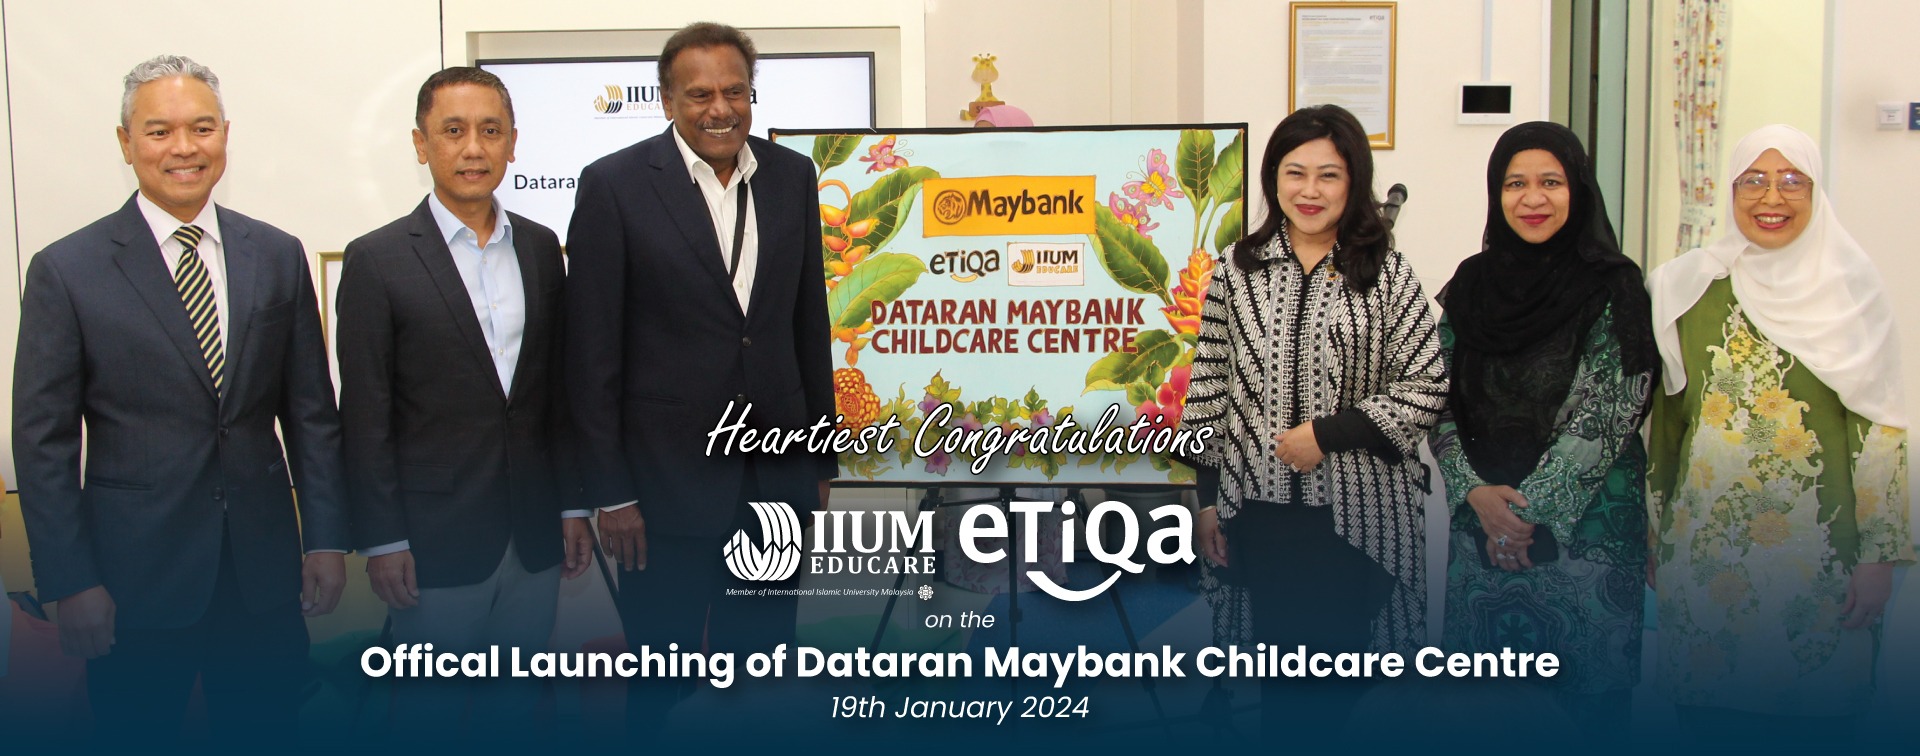 web-banner-official launch of Dataran Maybank Chilcare Centre